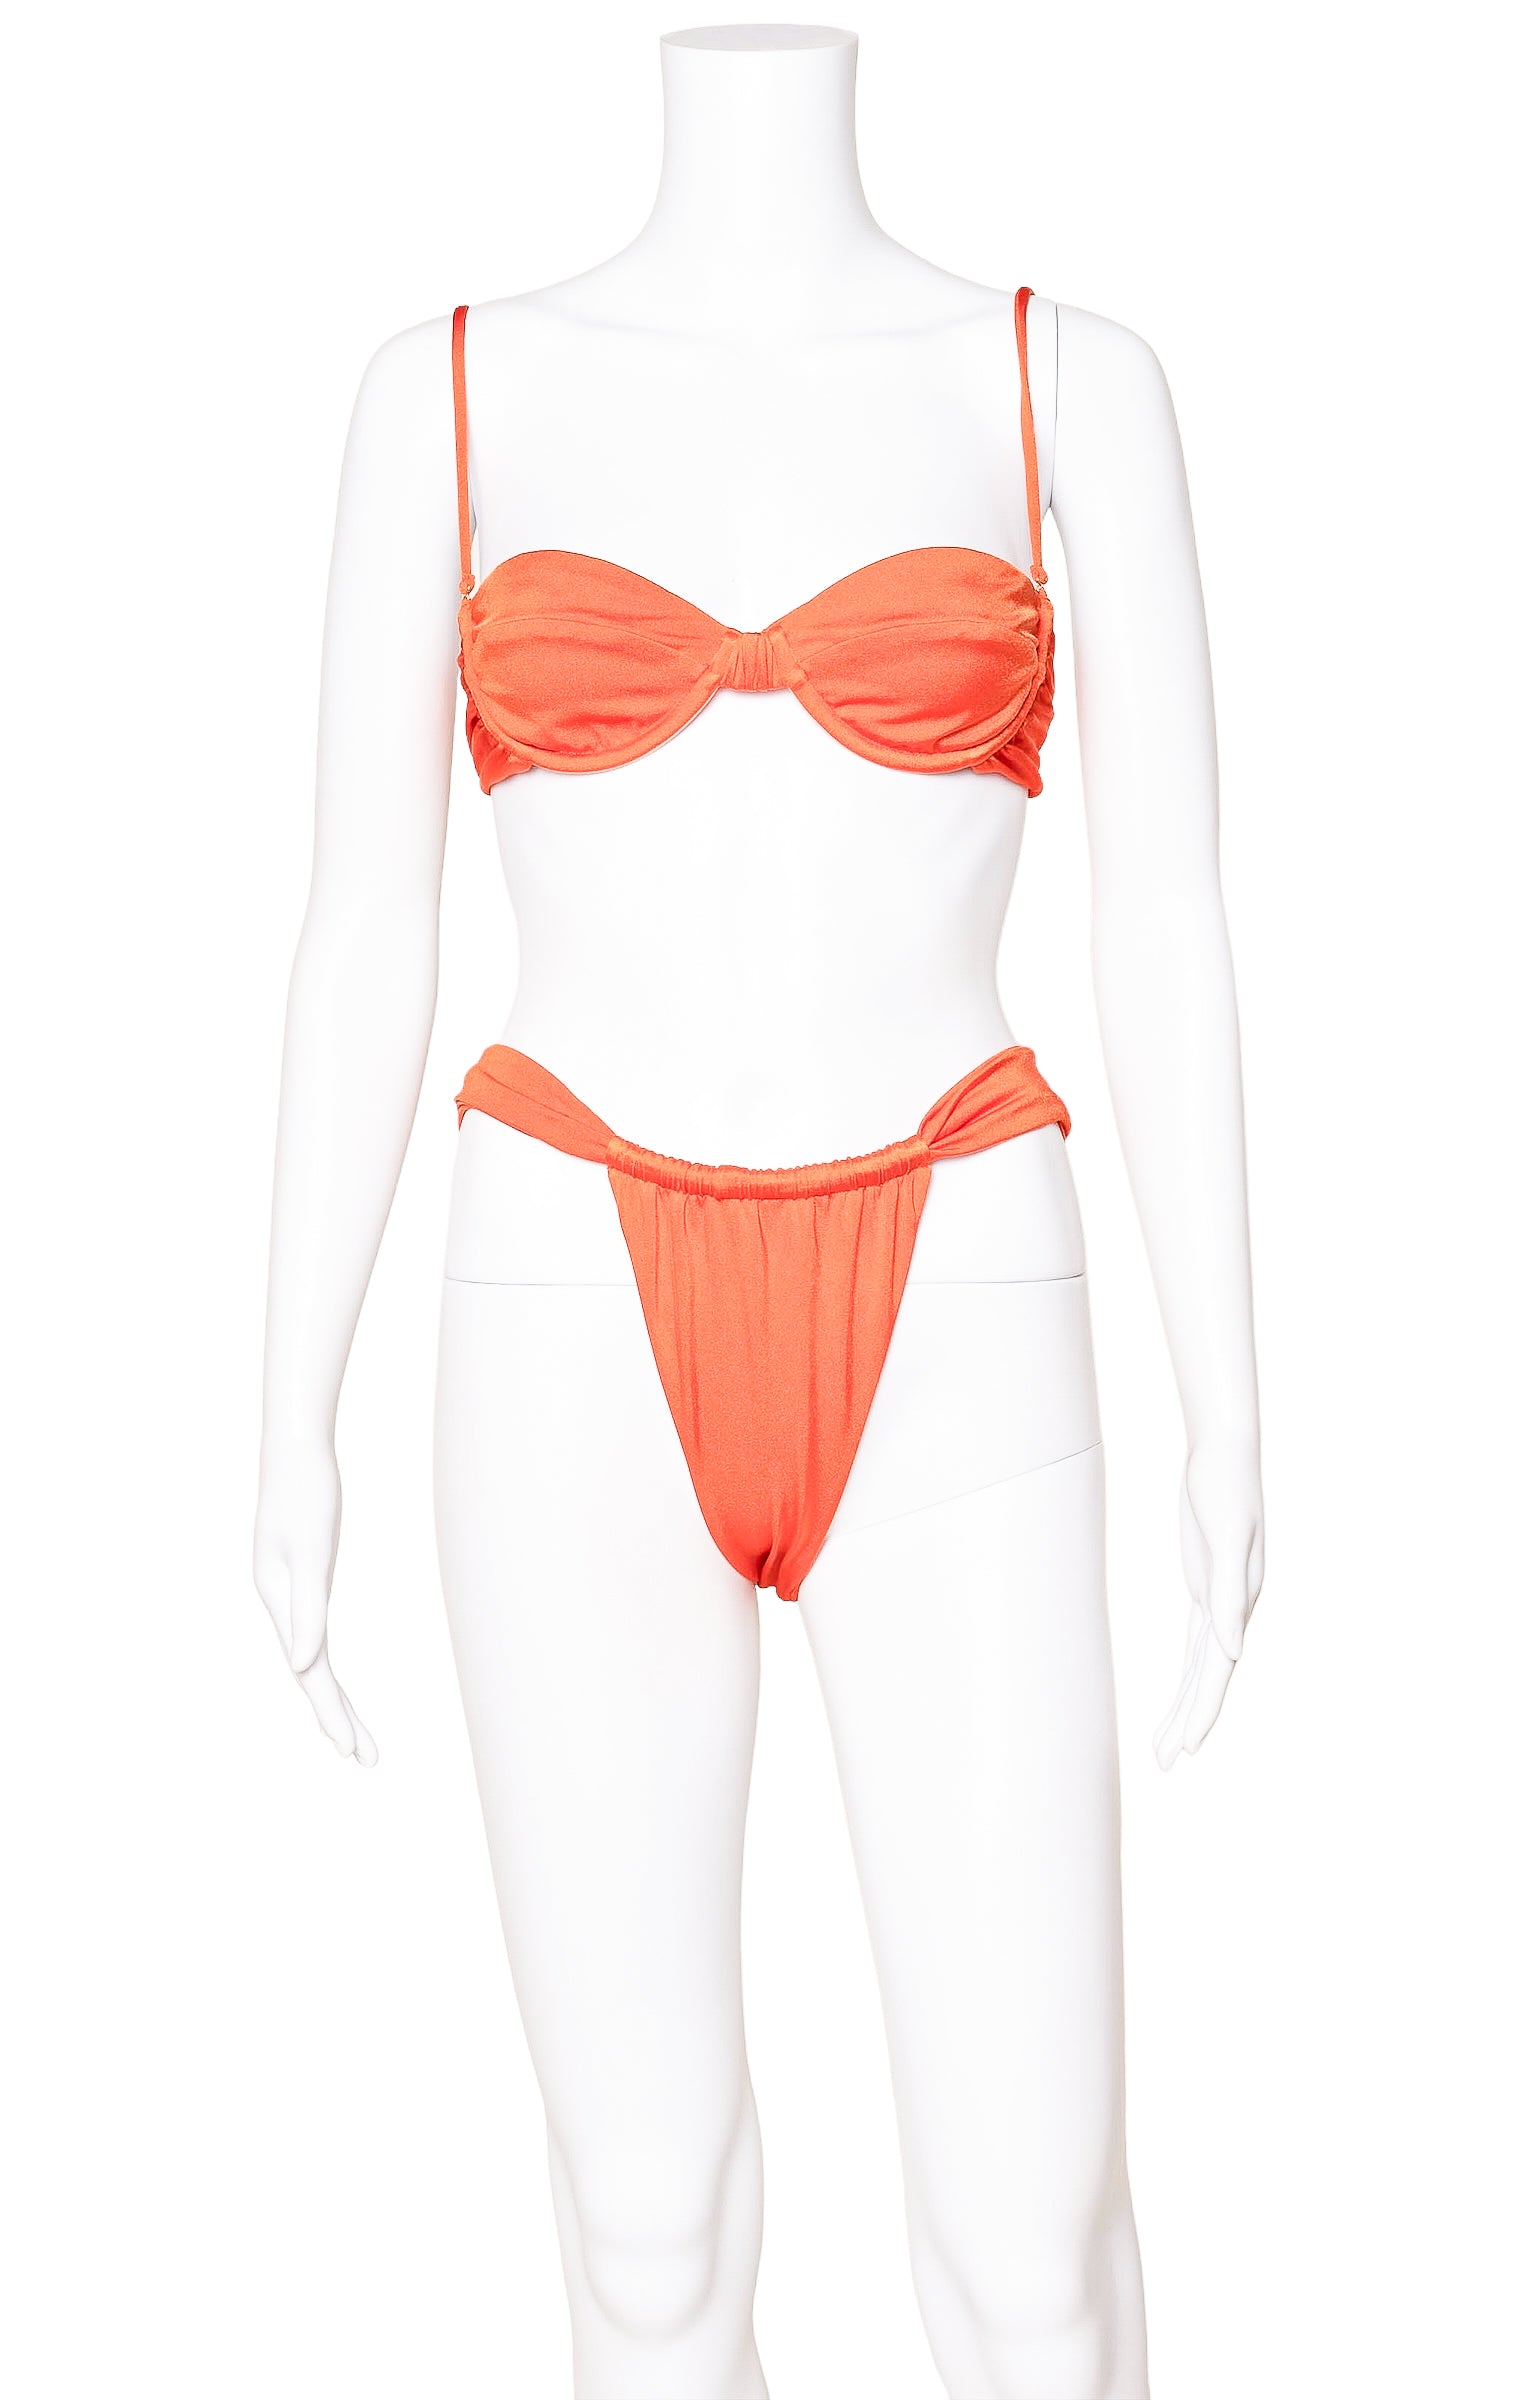 SOMMER (RARE & NEW) with tags Bikini Set Size: M